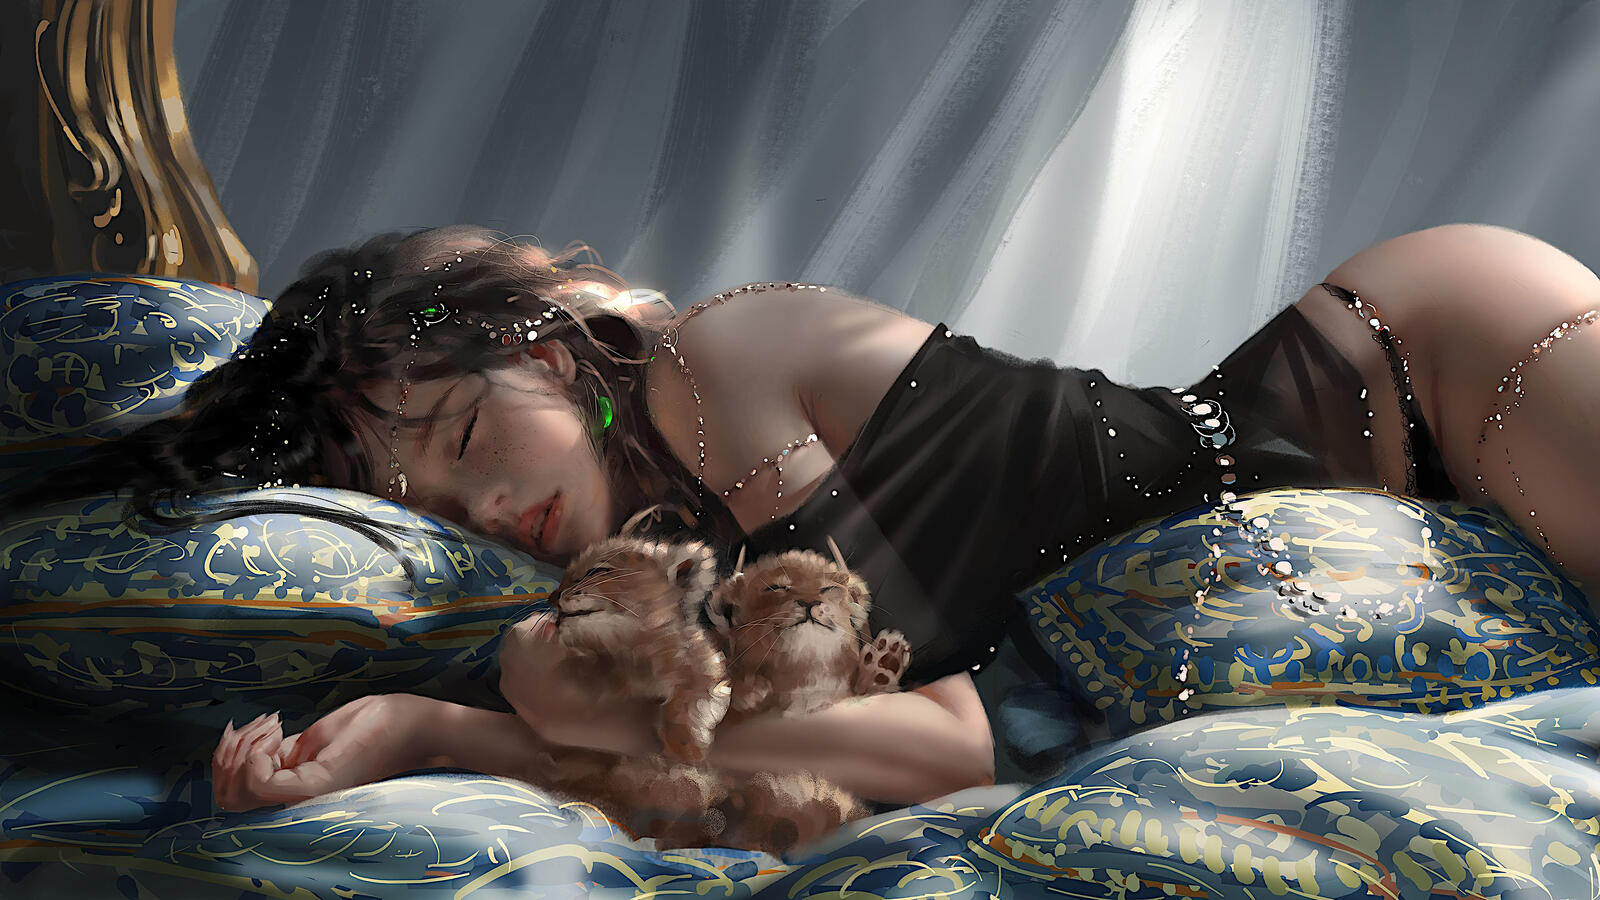 Free photo A girl sleeps cradling little lion cubs in her arms